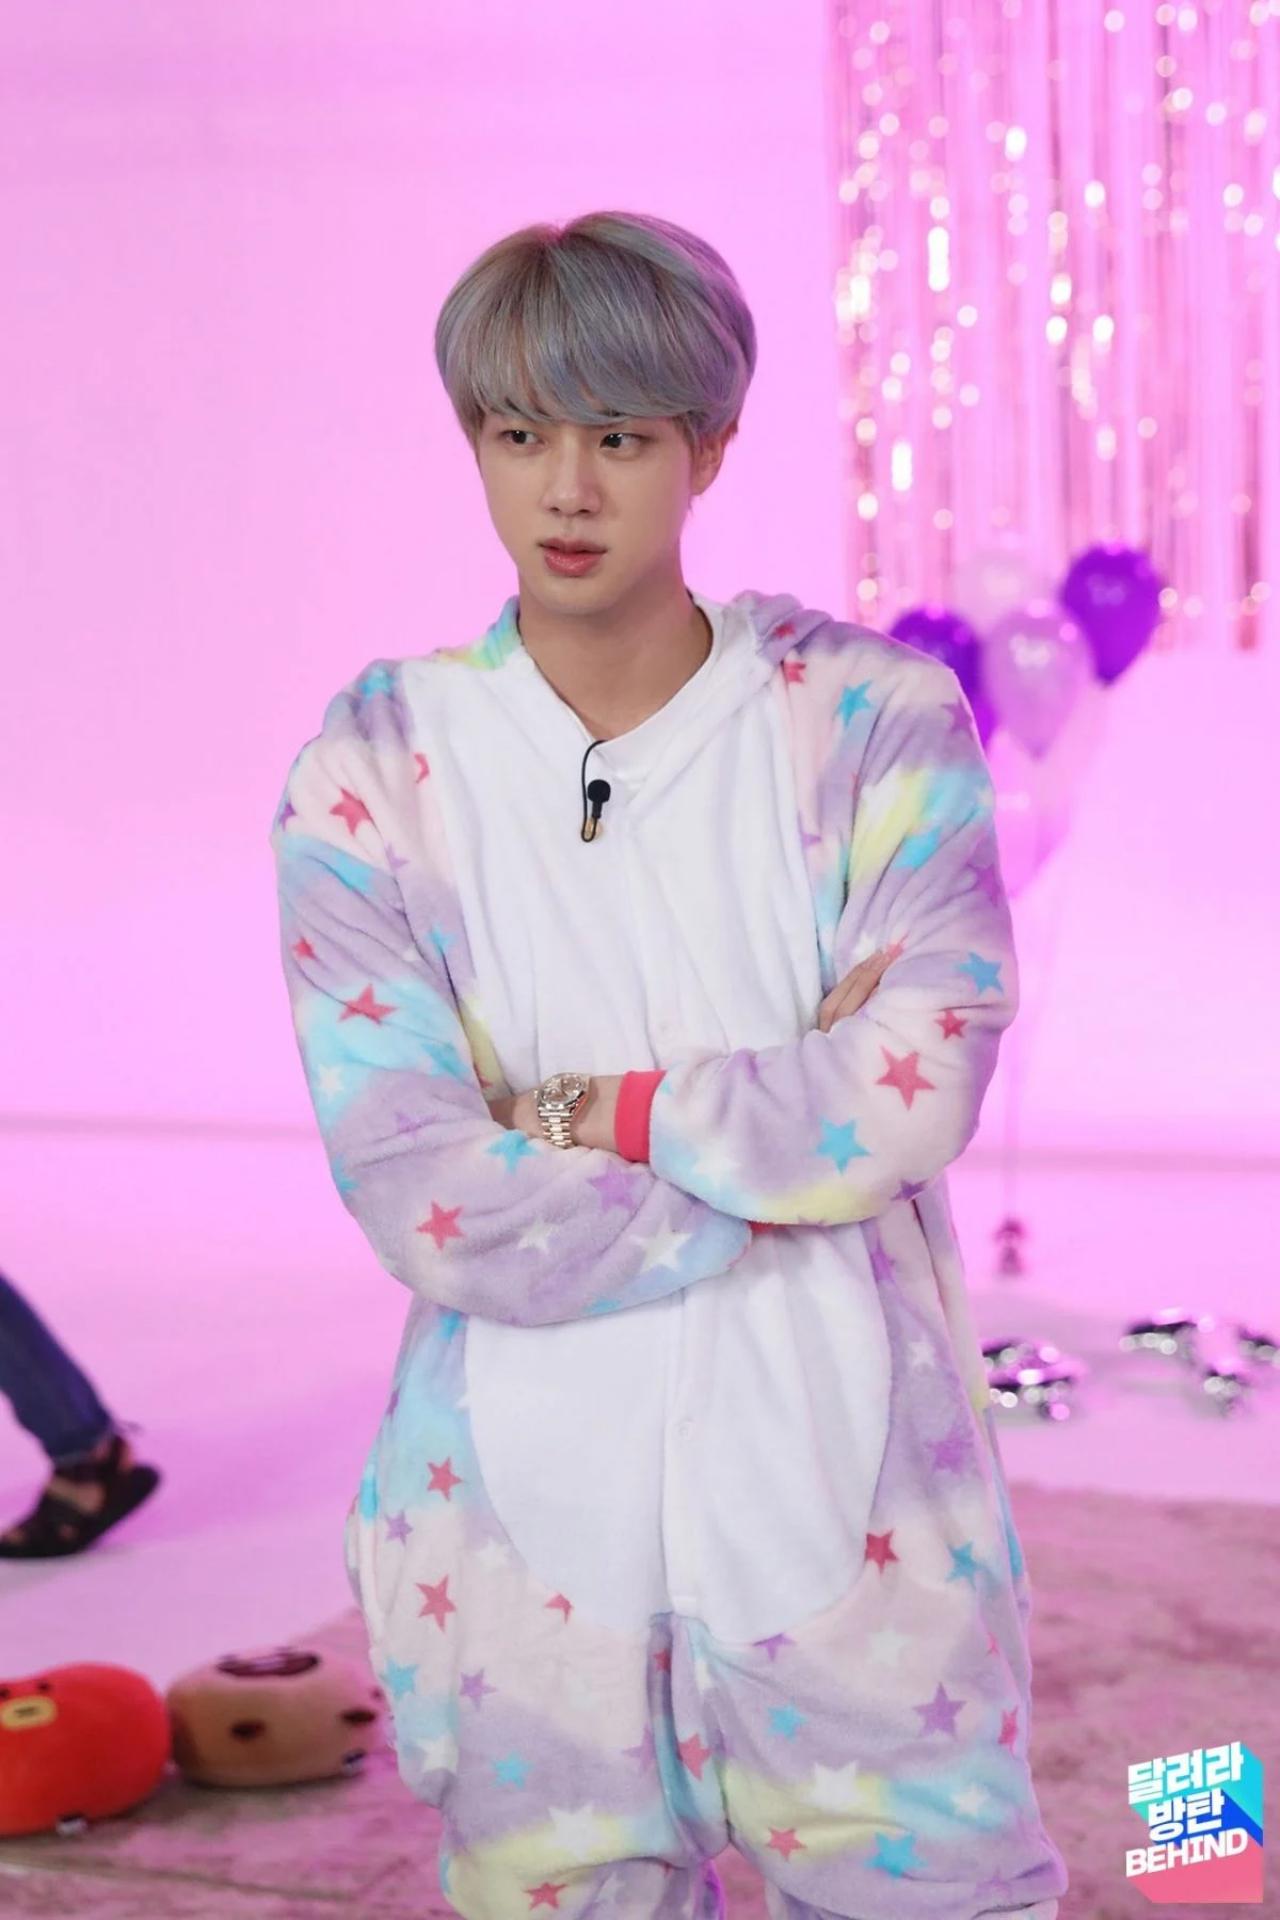 Jin never shies away from going that 'extra' mile to leave an impact with his ultra-fashionable choices. Take a look at this cute multicoloured unicorn pyjama set. In this Run! BTS episode, the seven members played games to get dibs on which pyjamas they could choose. Everyone hoped their dart would not land on Jin's outfit. But this oldest hyung is not Kim Seokjin without a reason - he chose this outfit voluntarily - despite winning the game!